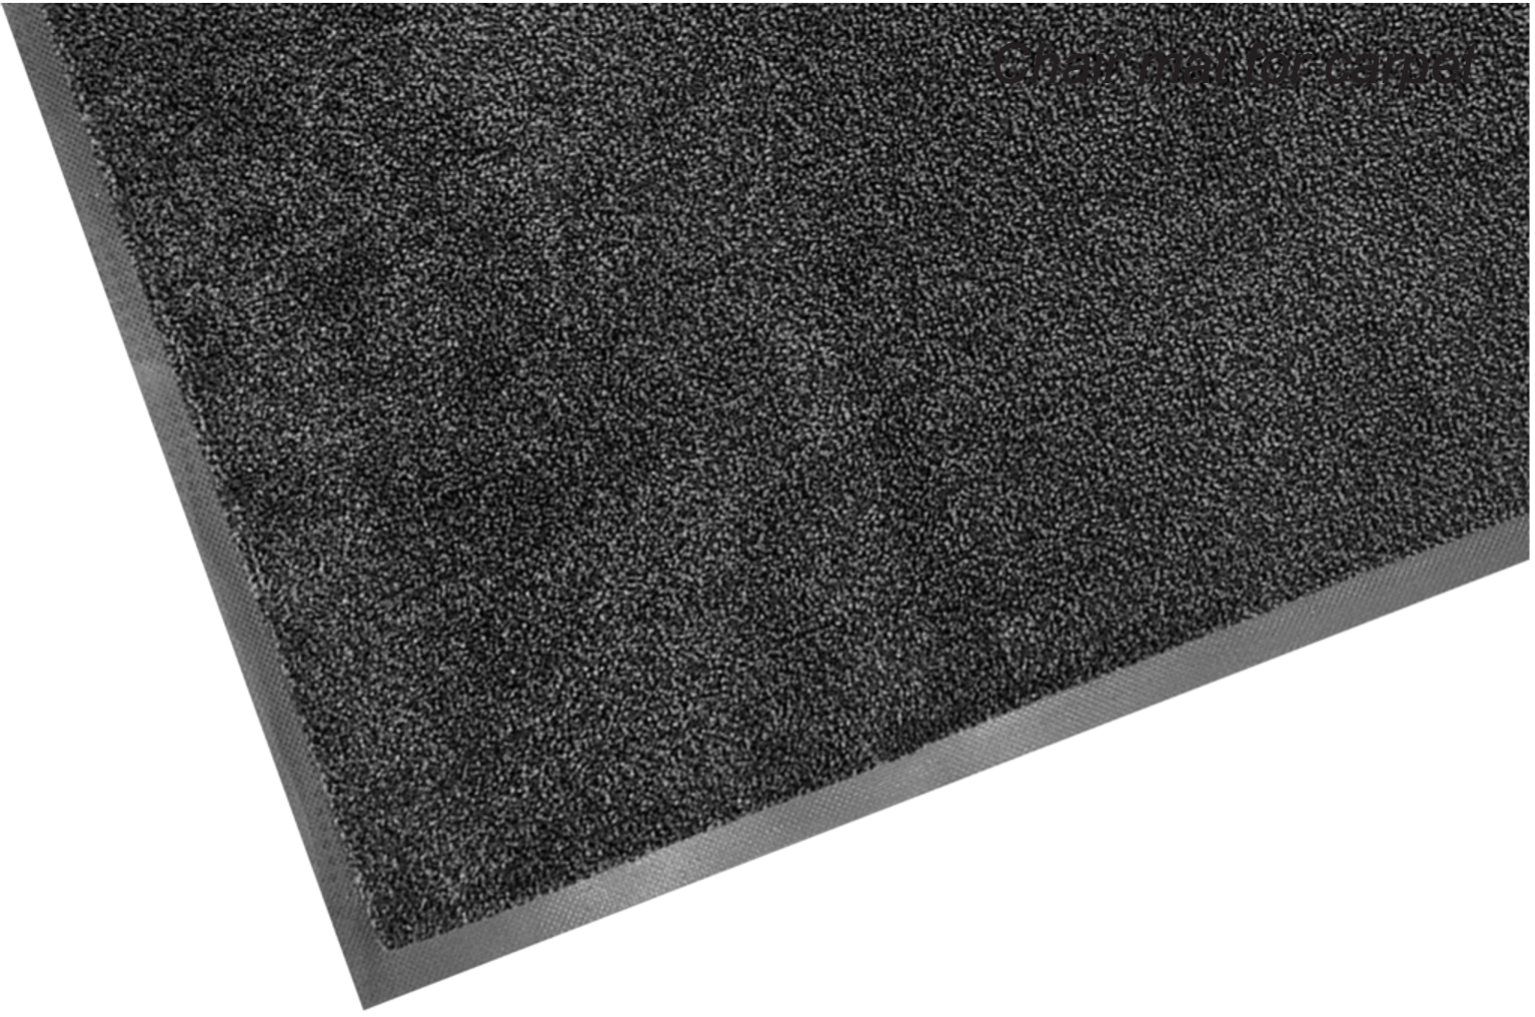 A charcoal-coloured chair mat with a carpet surface.